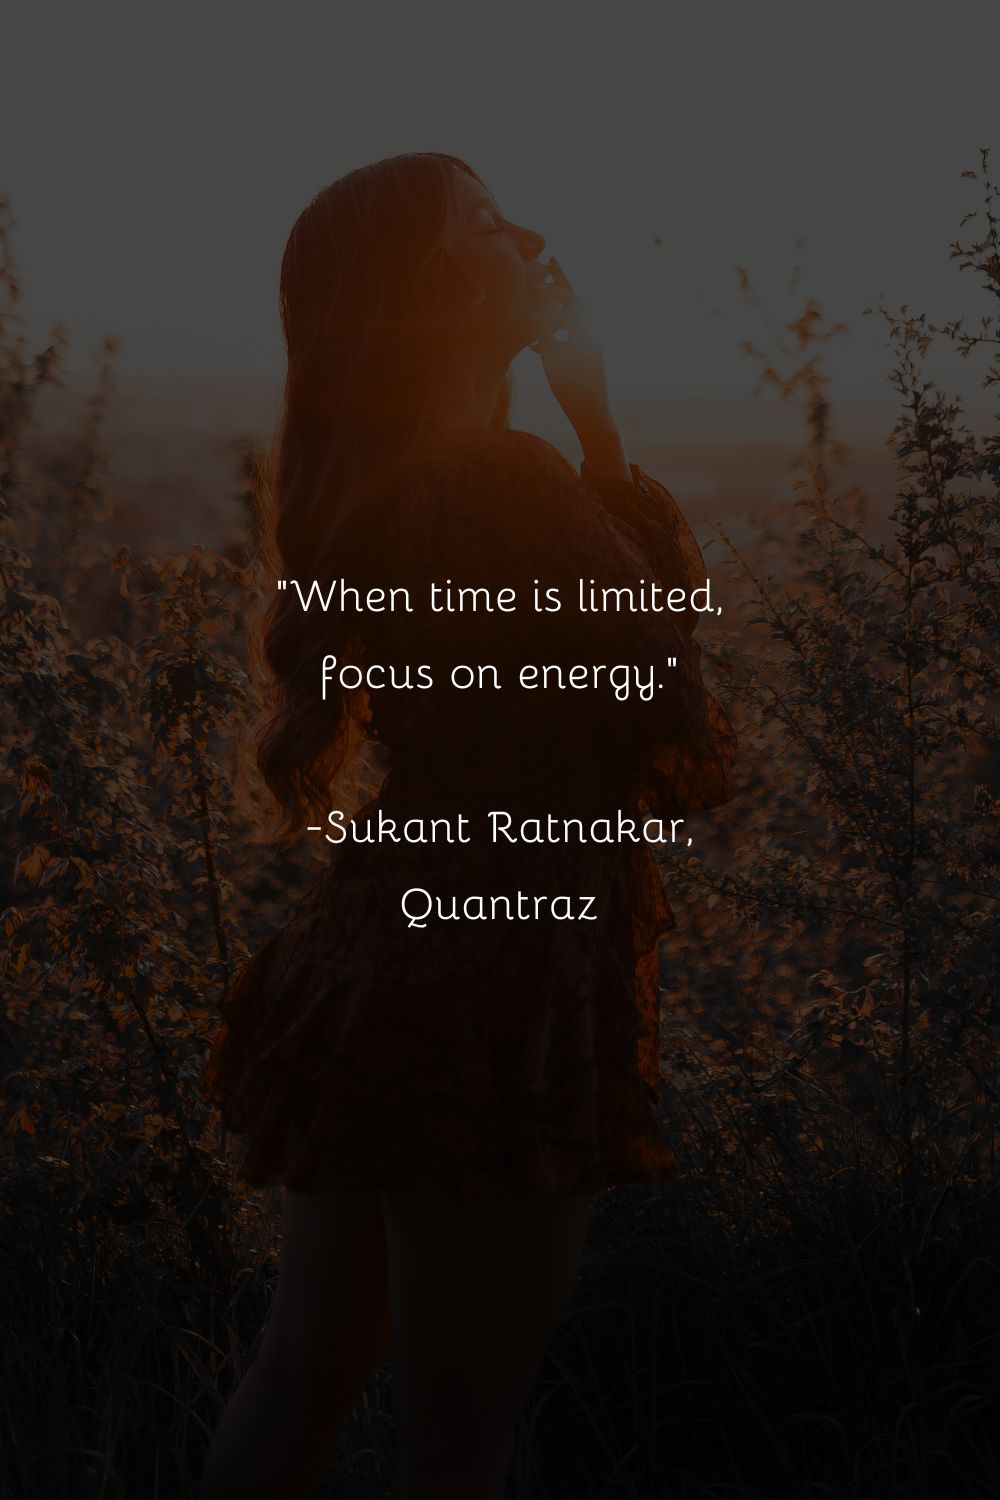 When time is limited, focus on energy